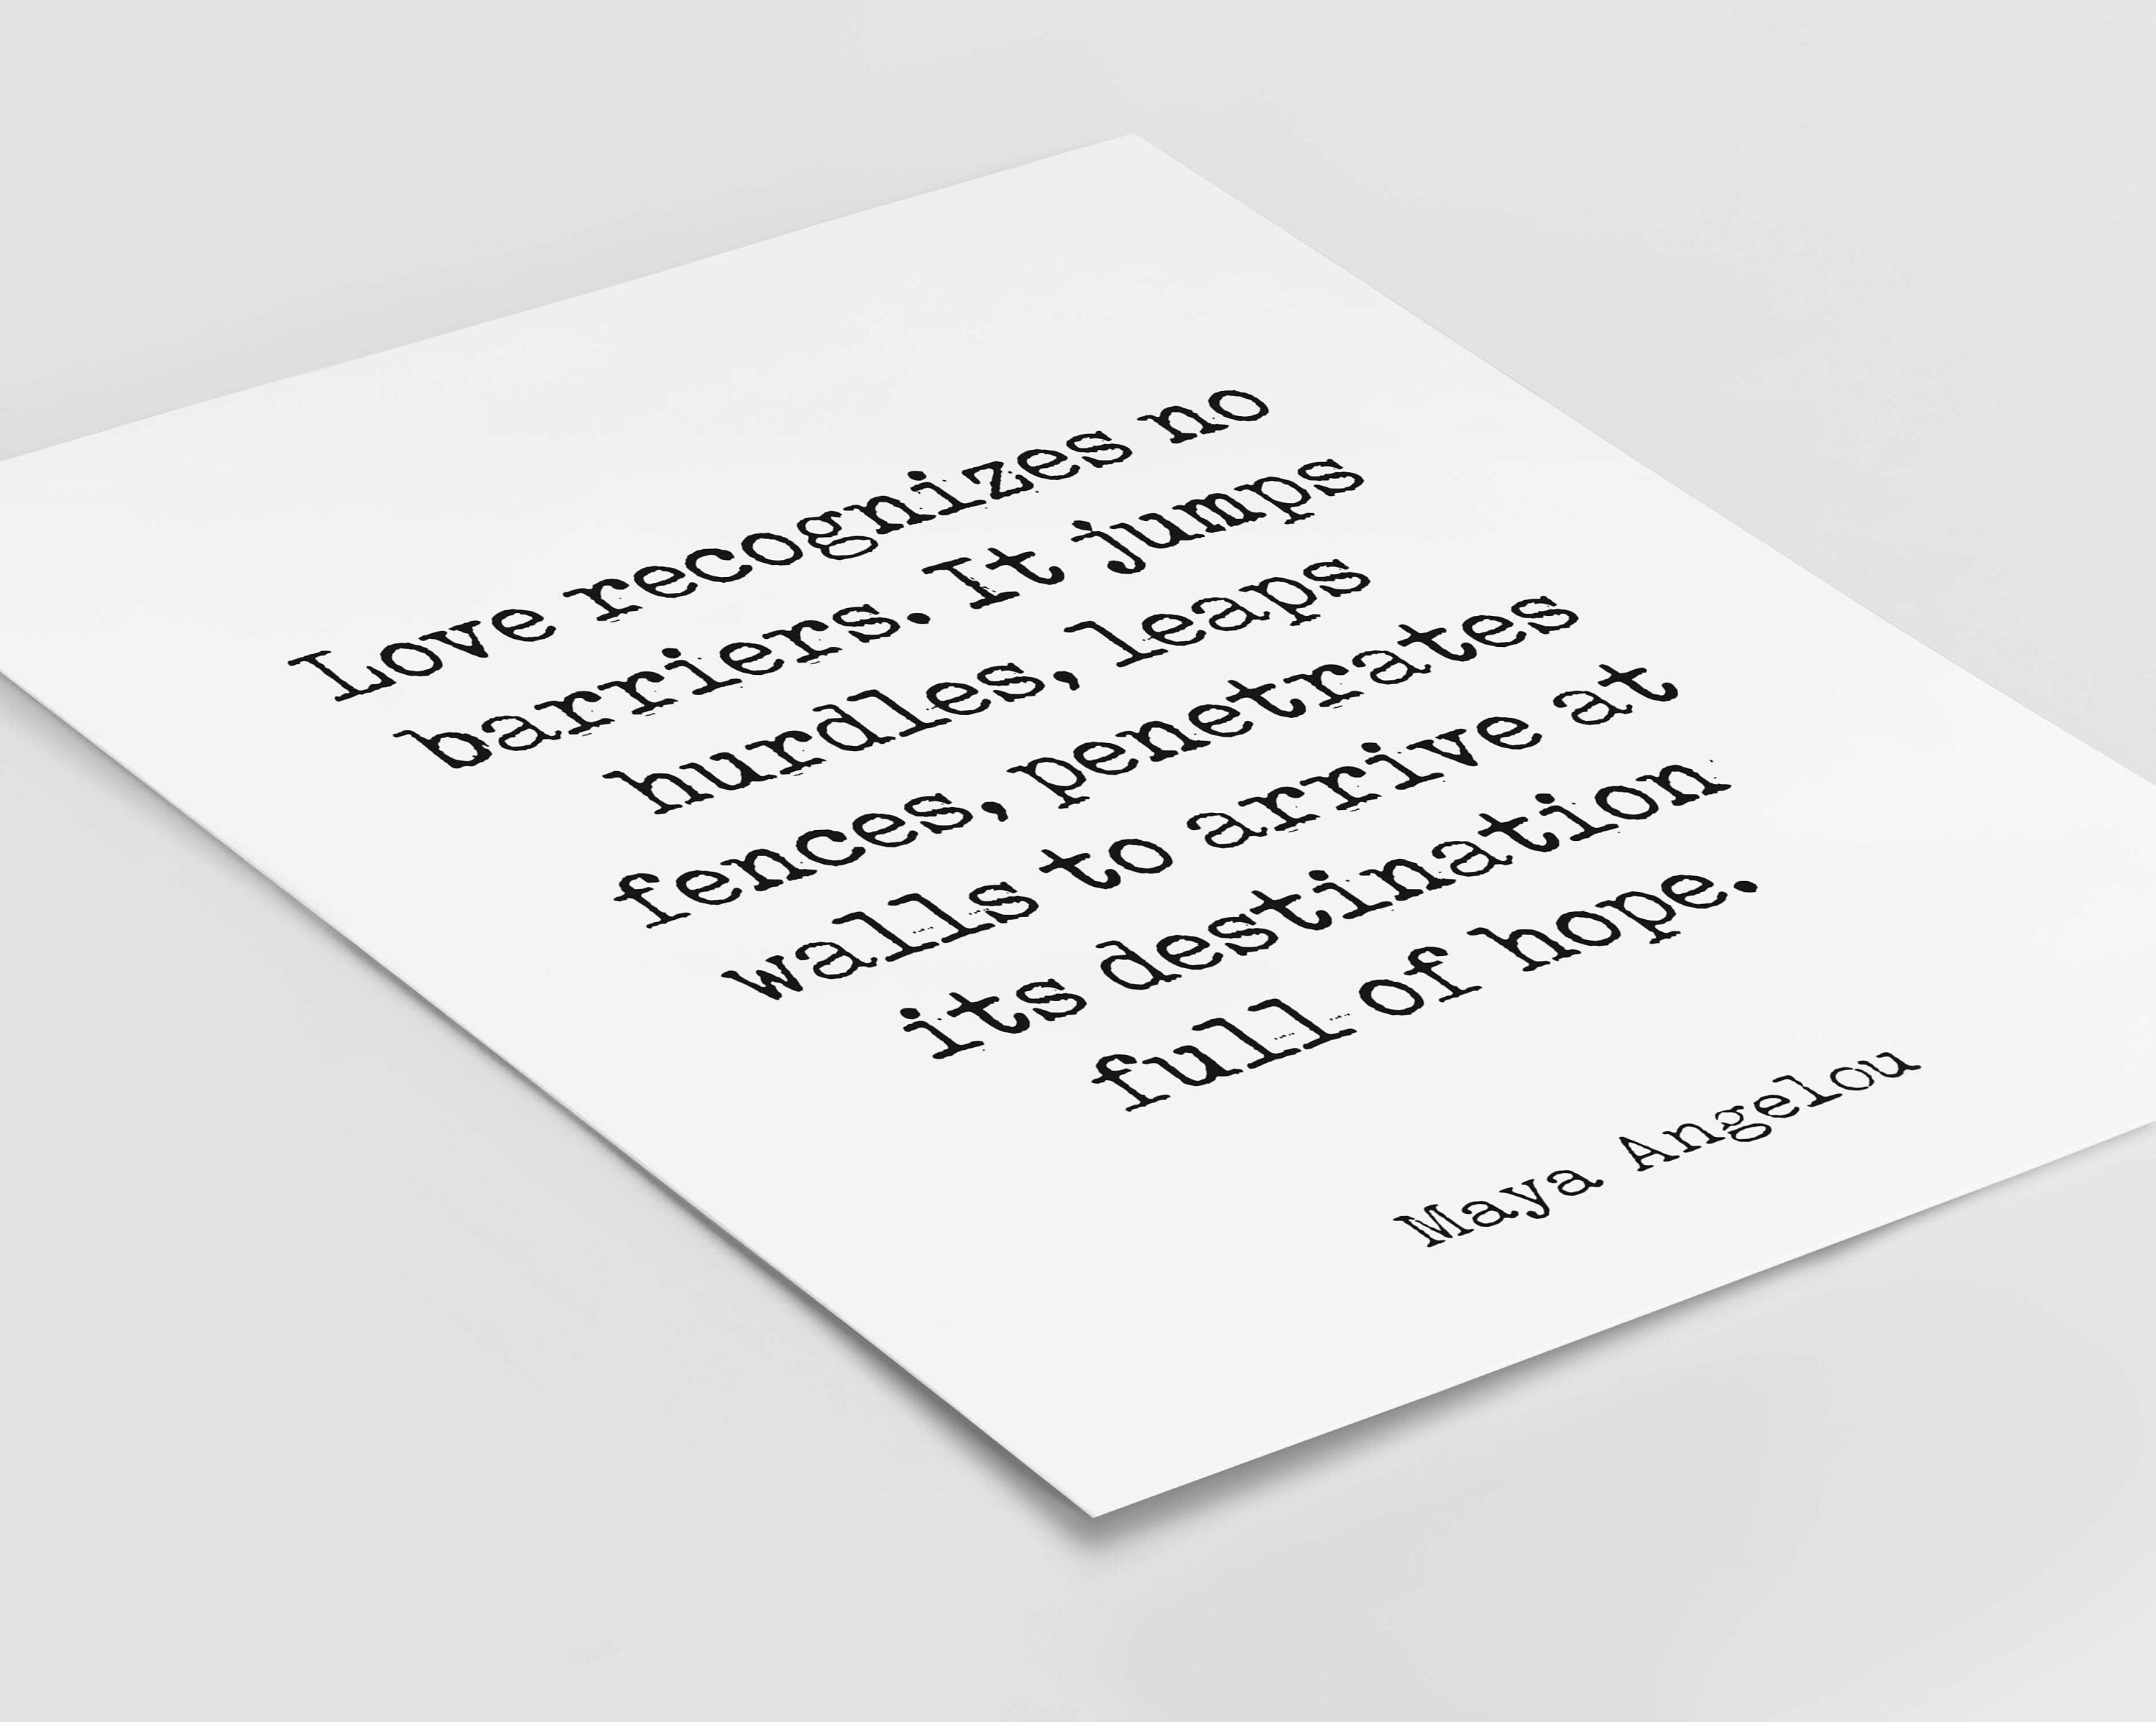 Maya Angelou Love Recognizes No Barriers Inspirational Quote Print, Black & White Minimalist Art